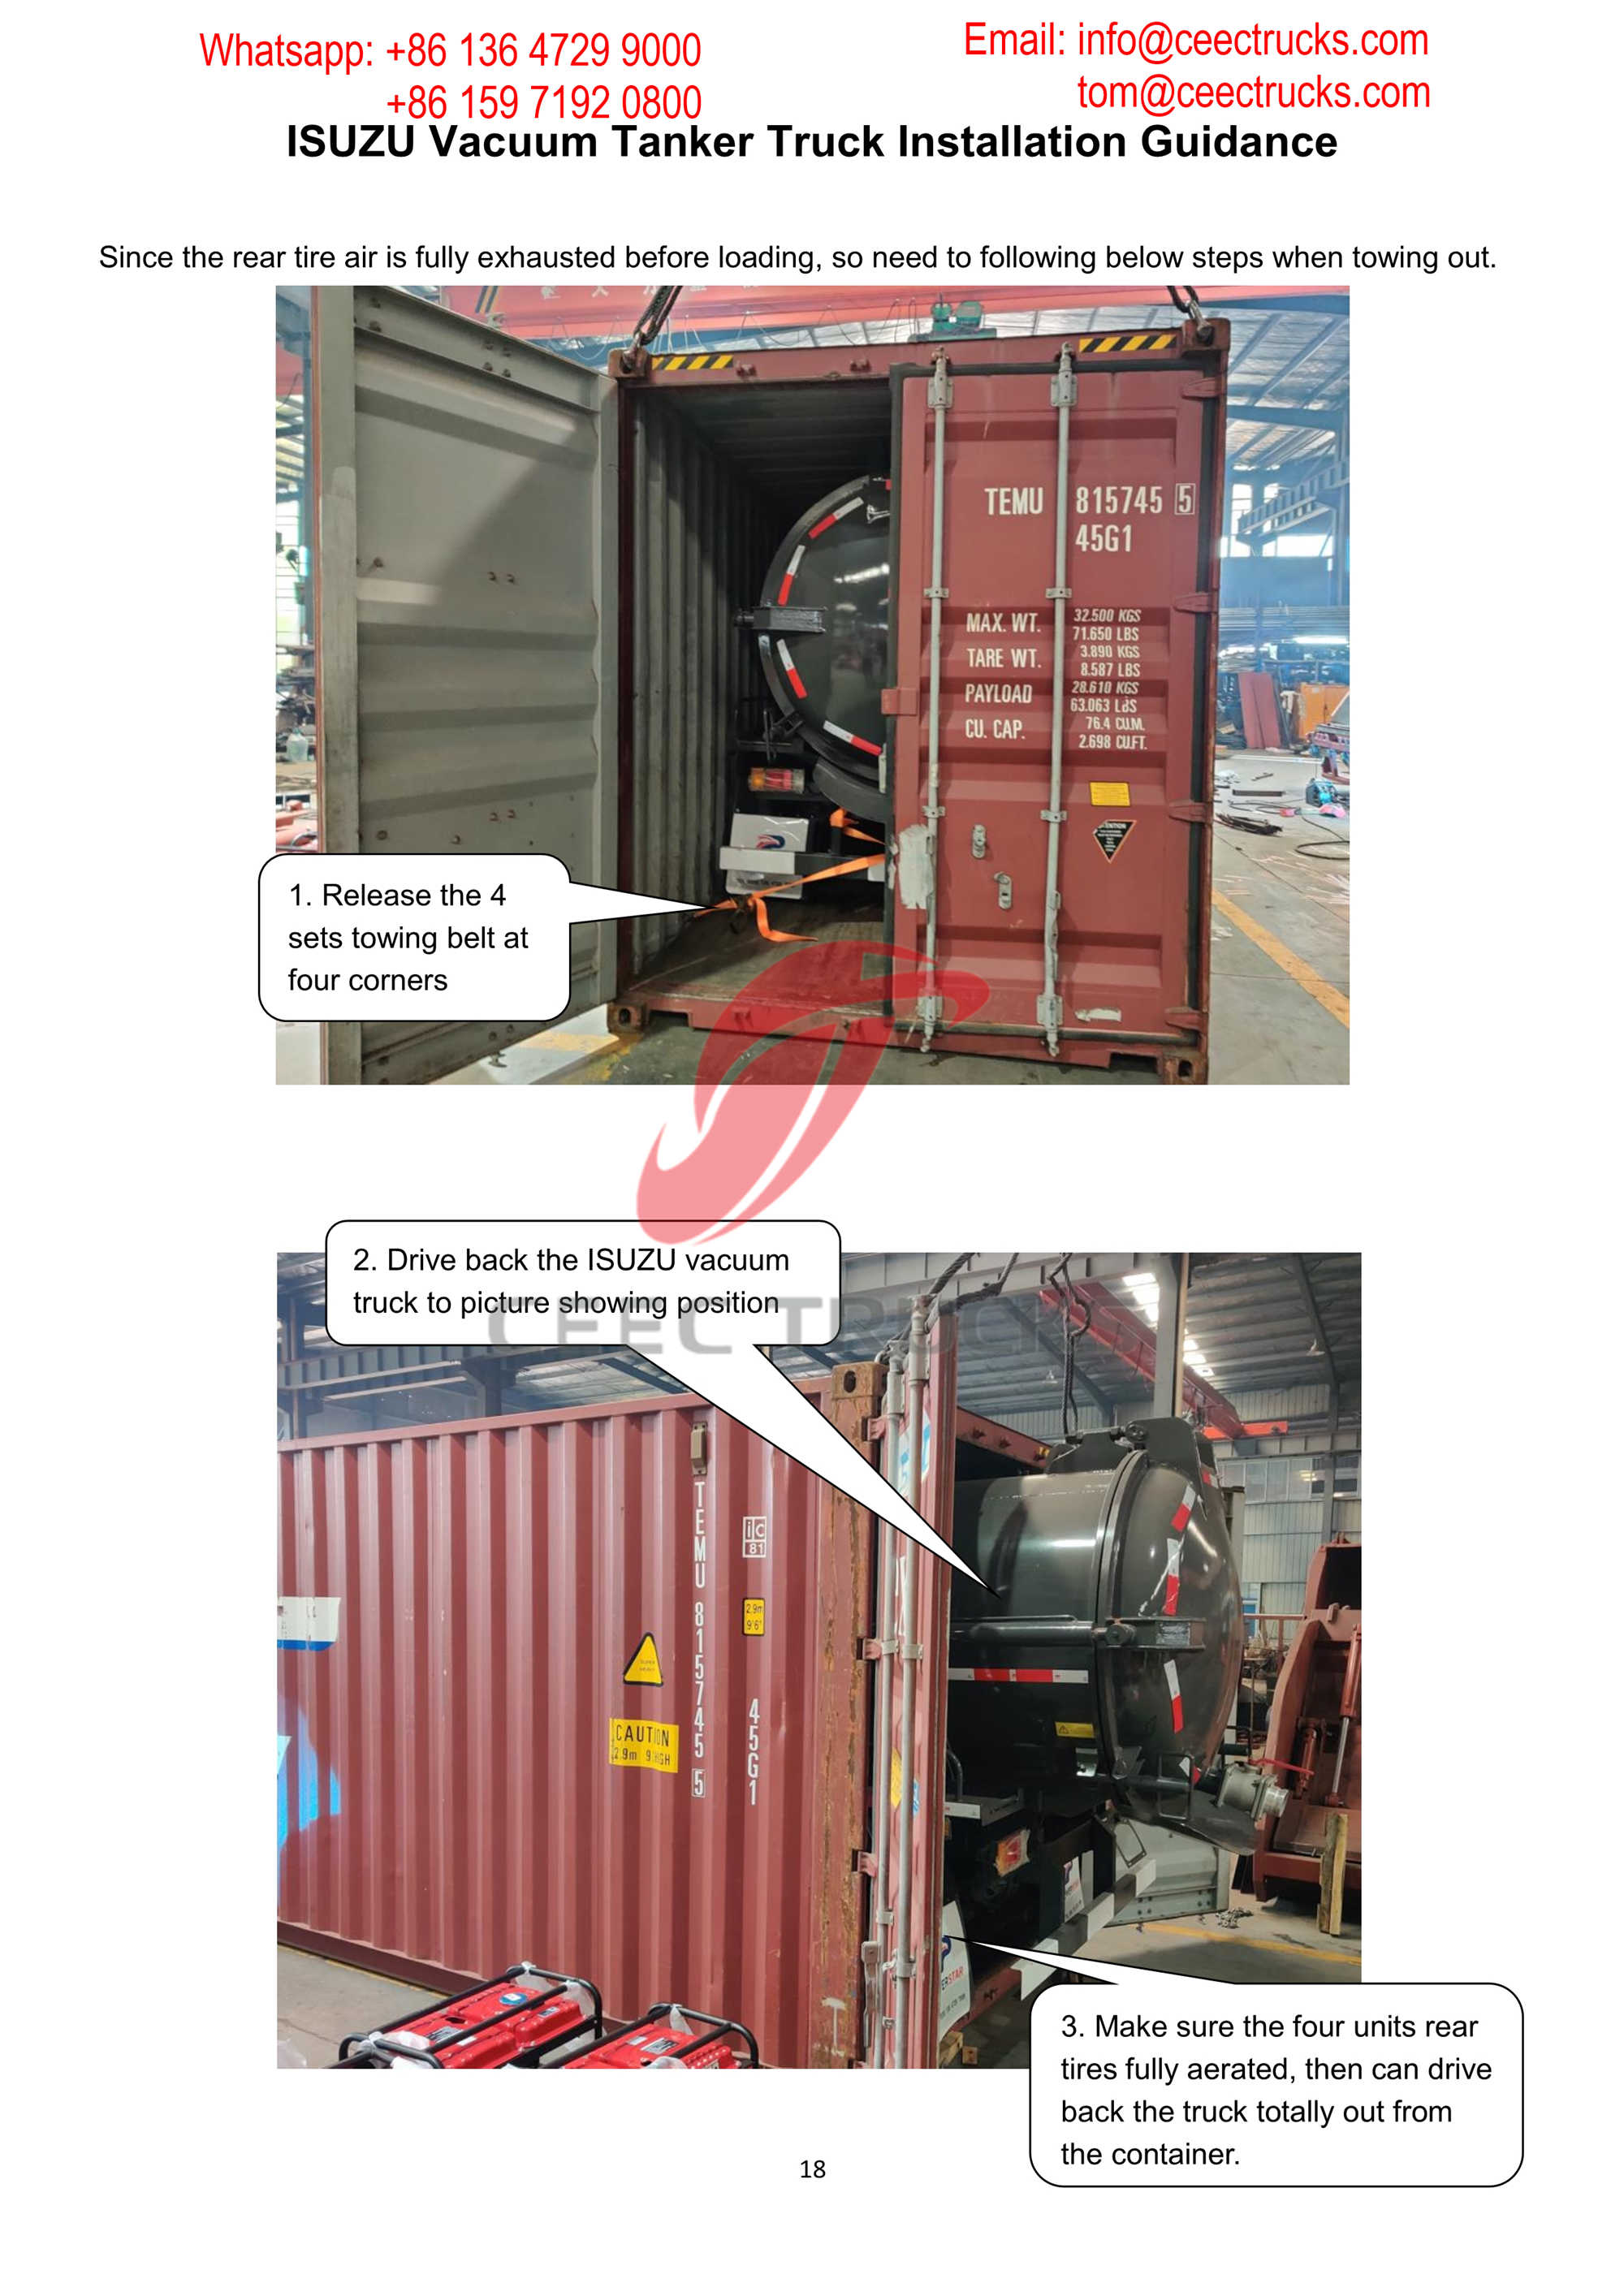 How to delivery ISUZU vacuum truck by 40ft Shpping Containers